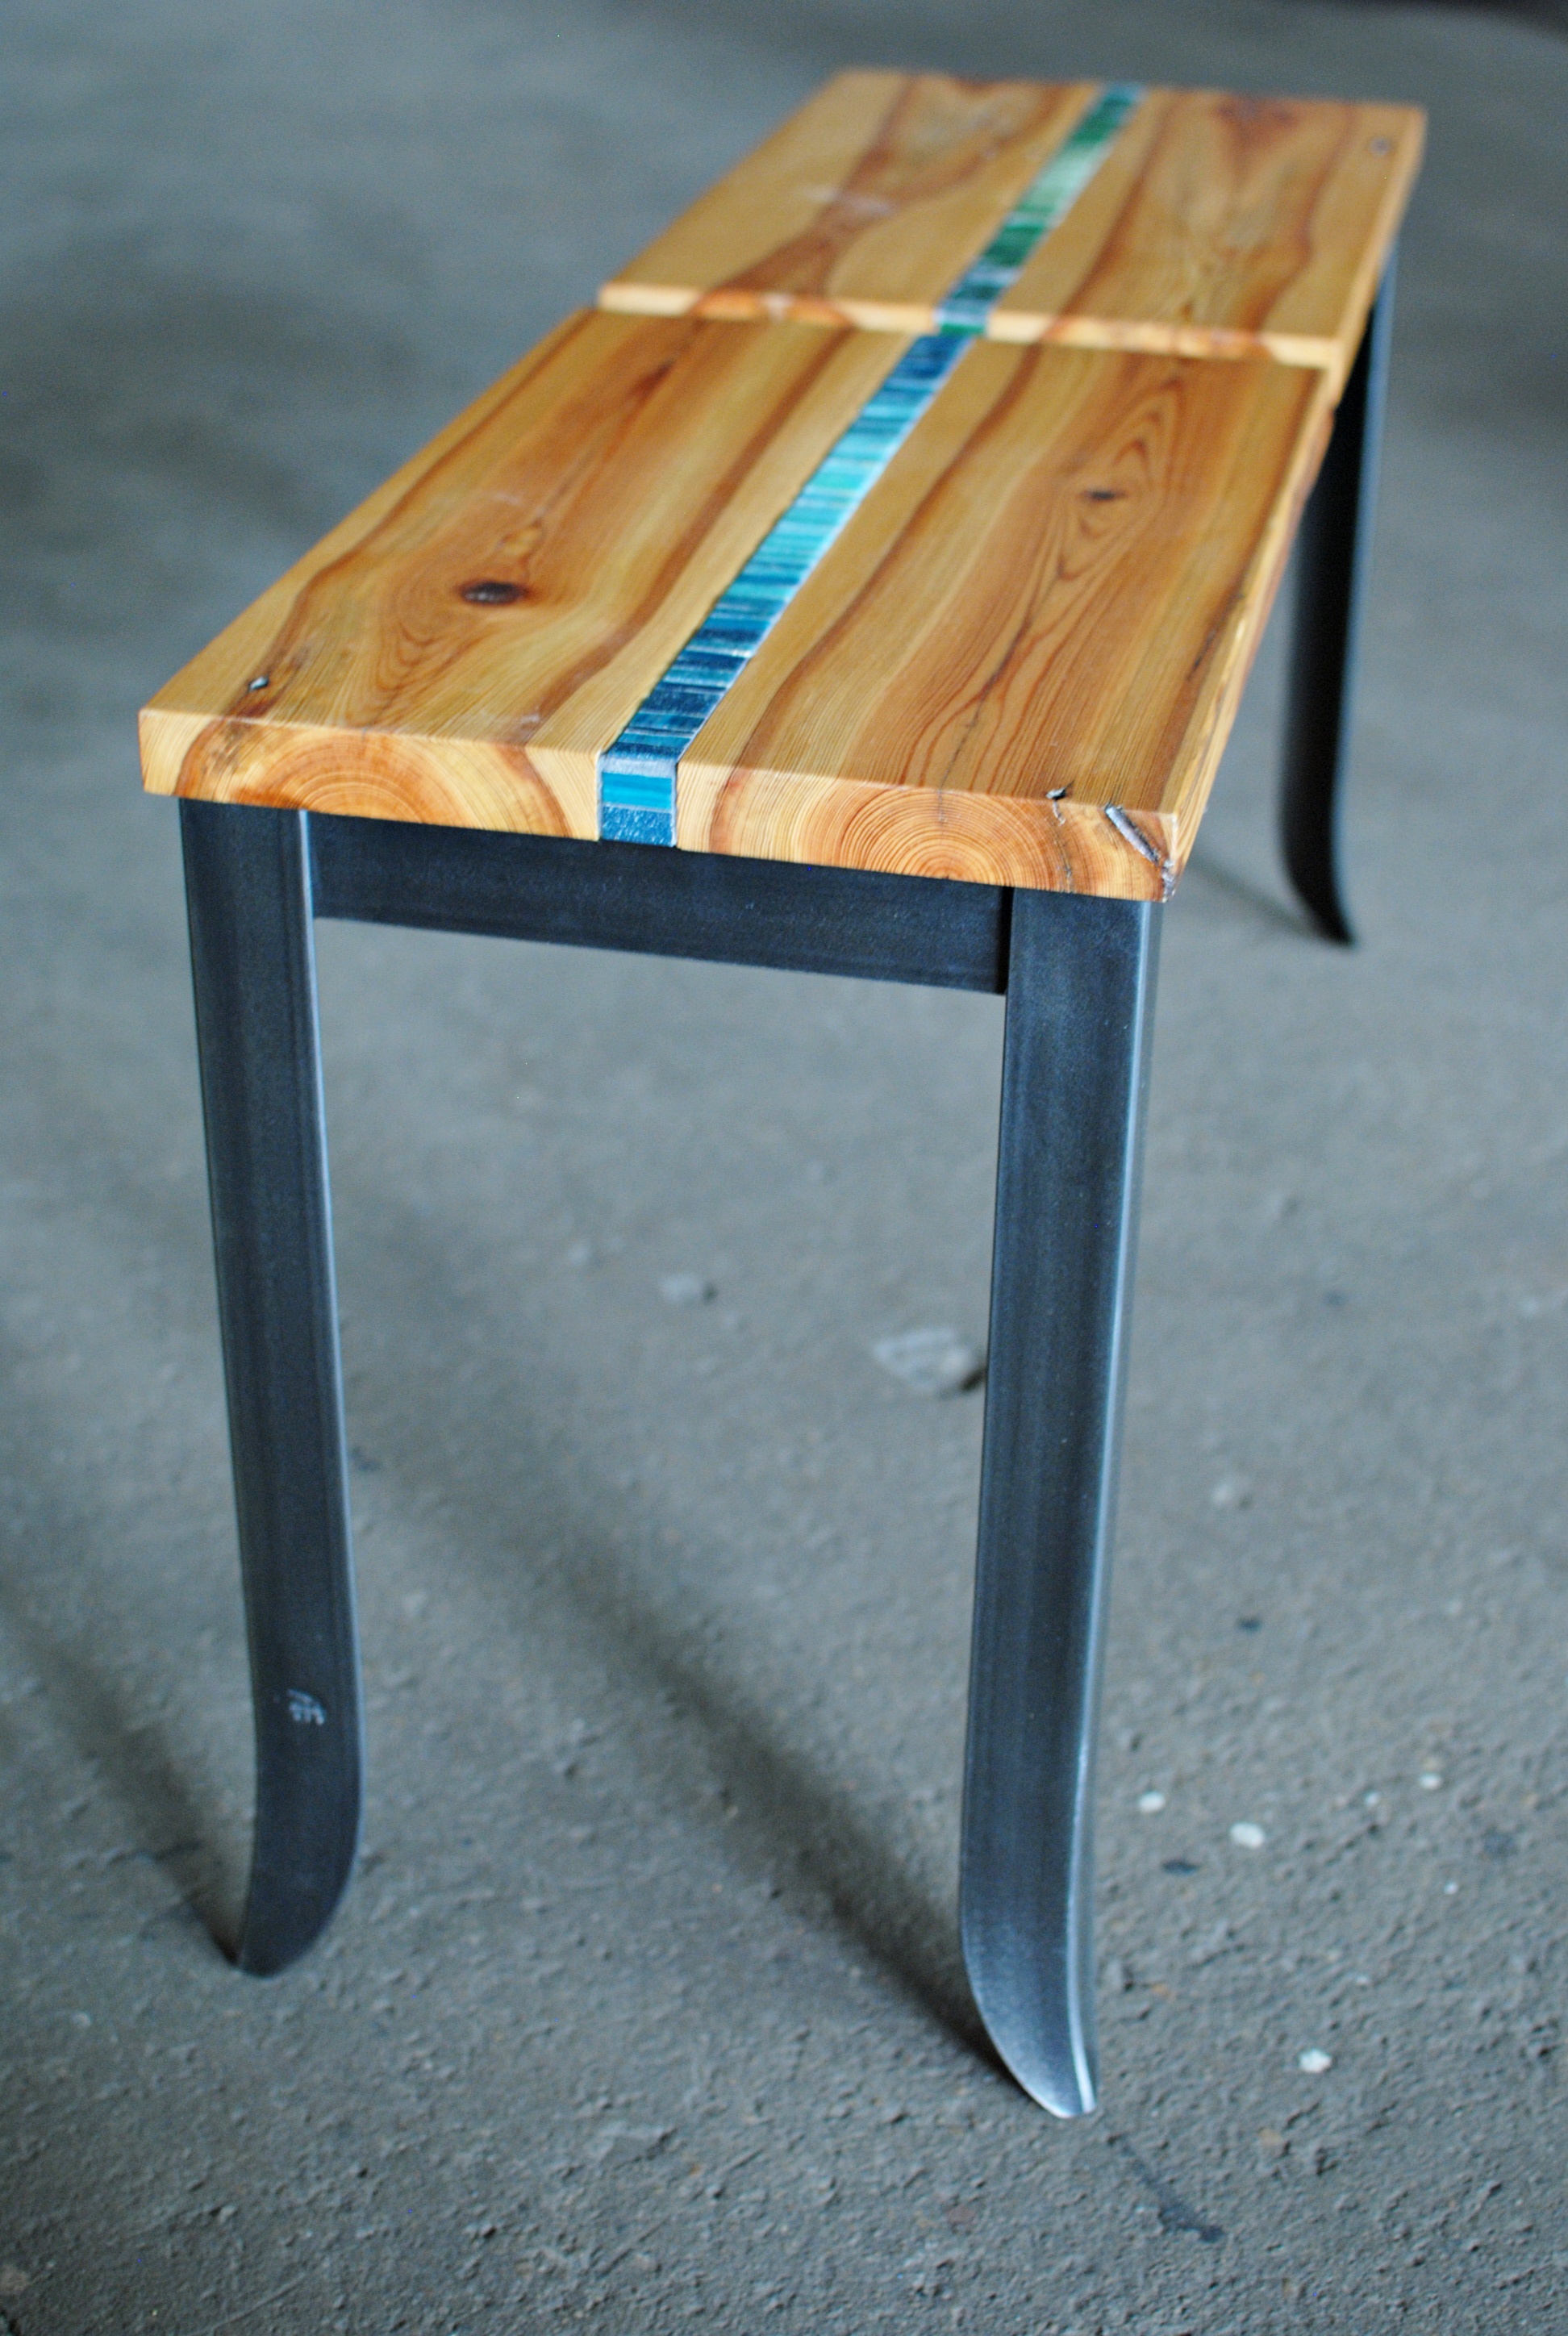 Custom Interior bench with mosaic inlay in wood seats and forged steel legs